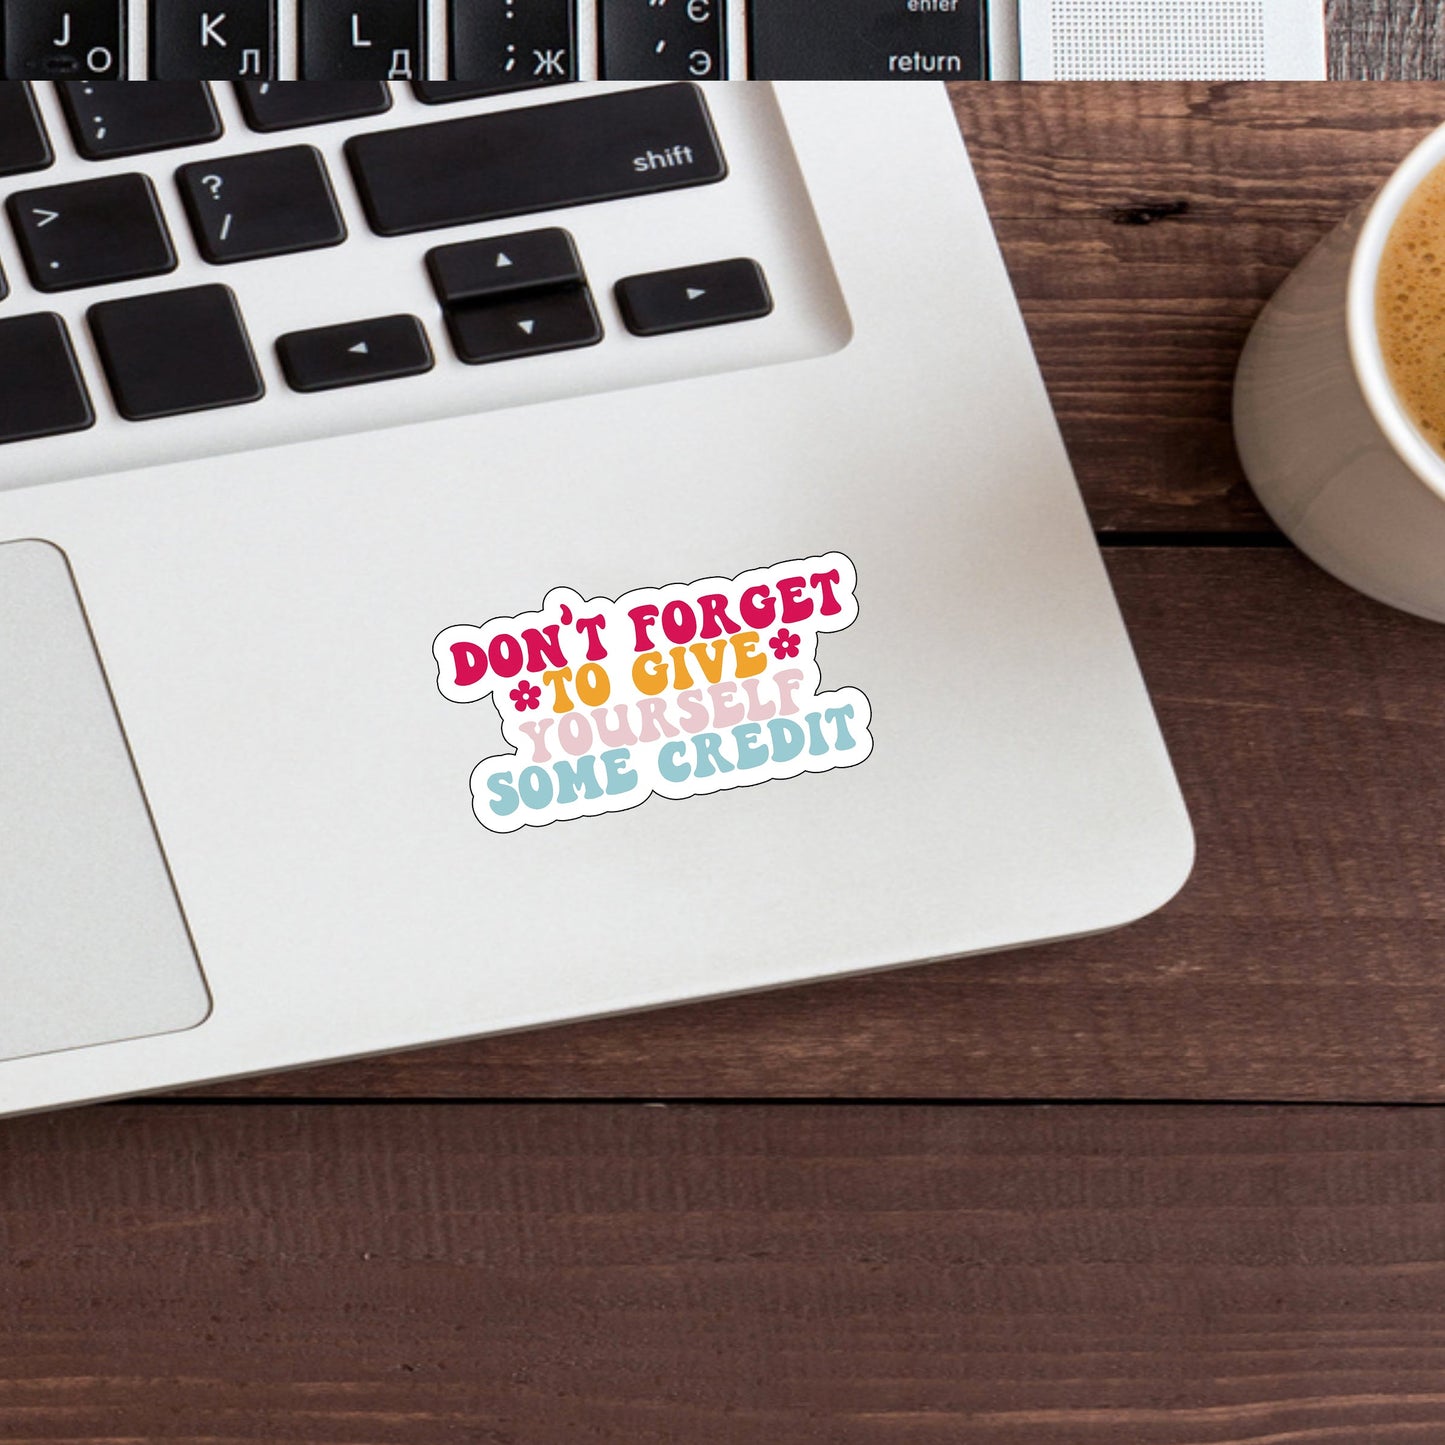 Don't forget to give yourself some credit  Sticker,  Vinyl sticker, laptop sticker, Tablet sticker